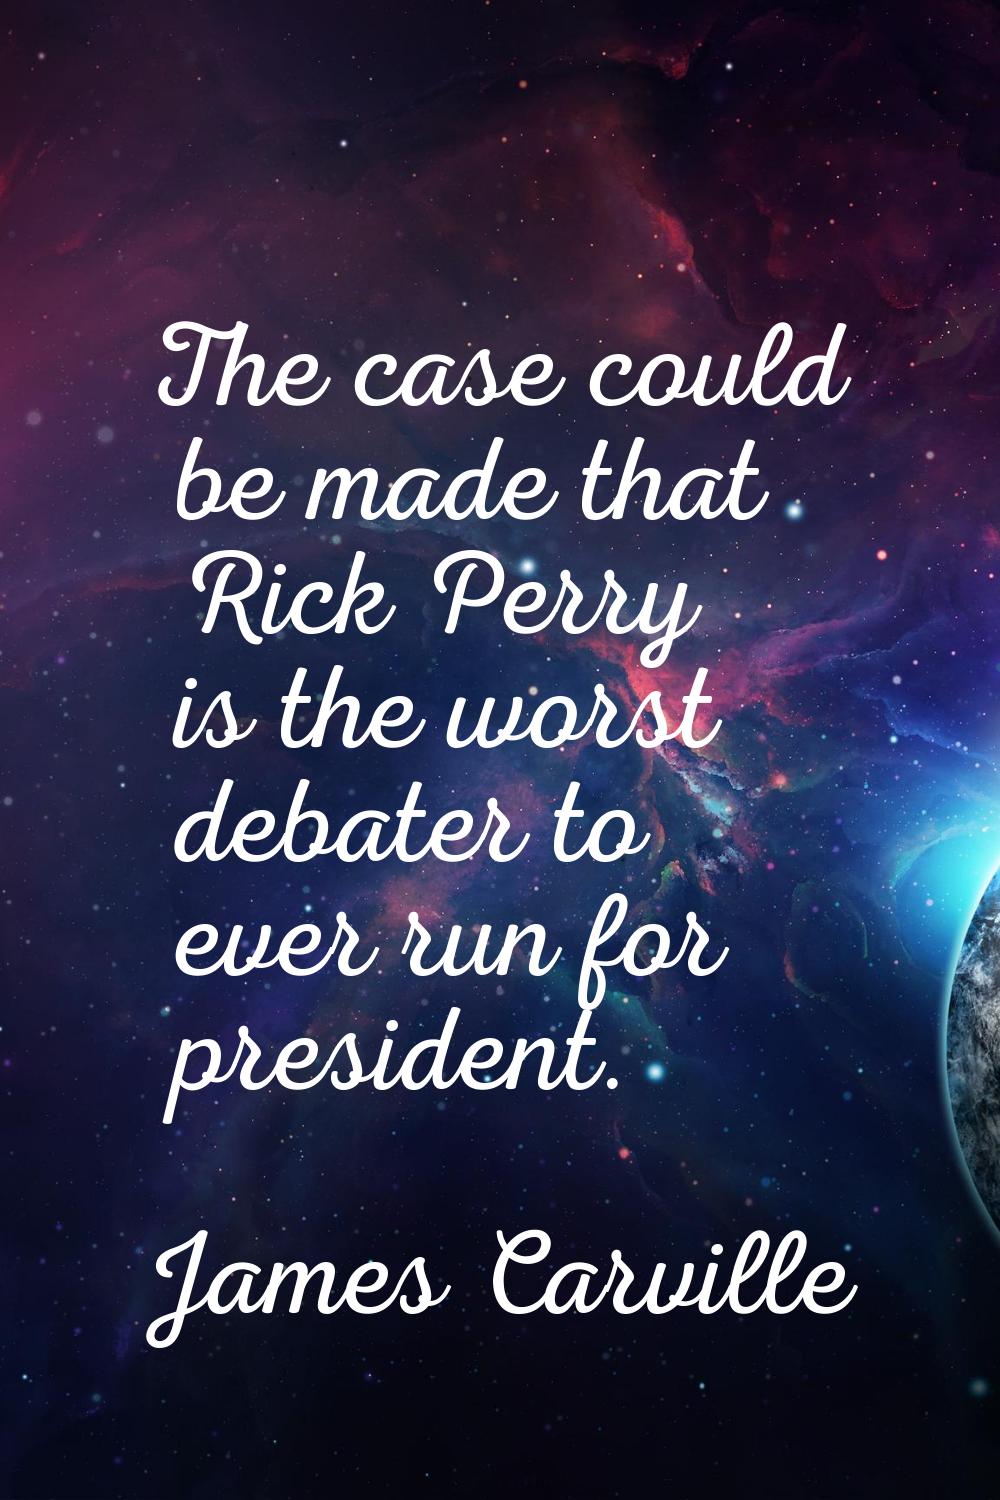 The case could be made that Rick Perry is the worst debater to ever run for president.